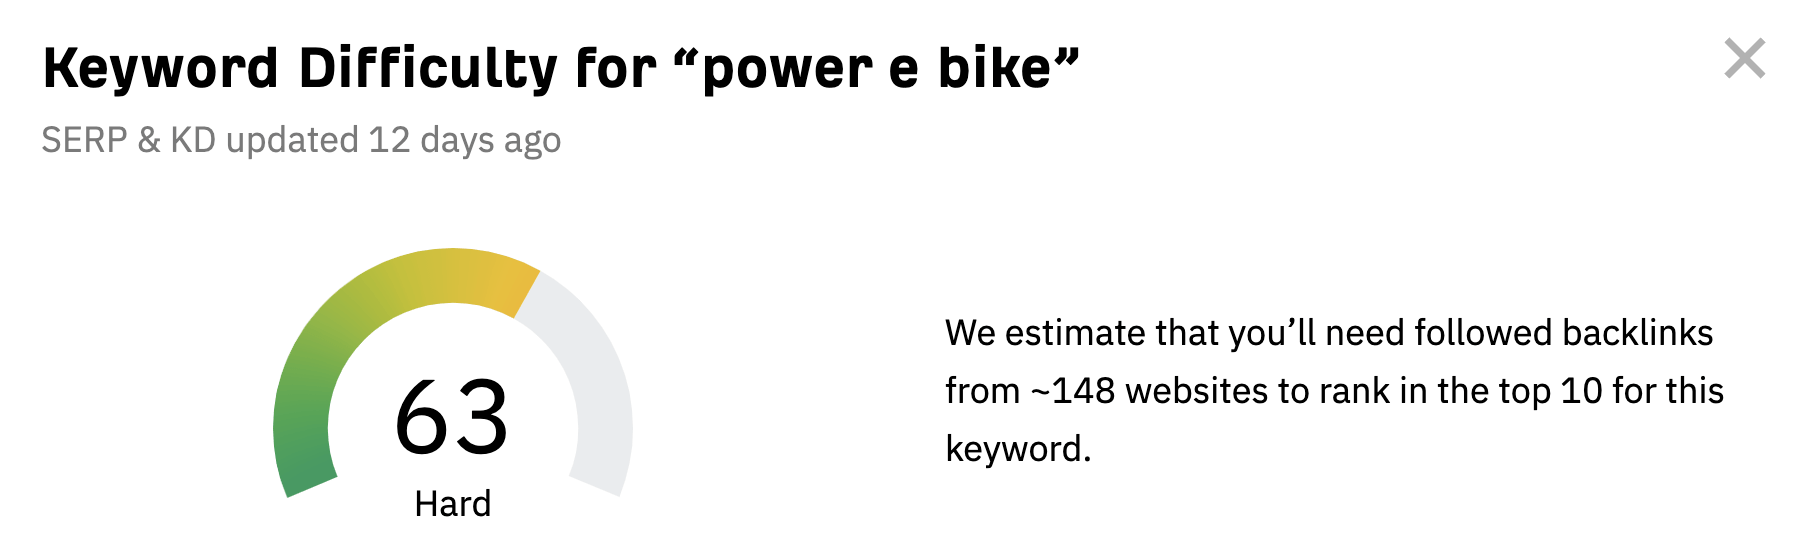 The Ahrefs Keyword Difficulty (KD) score for "power e bike" is high